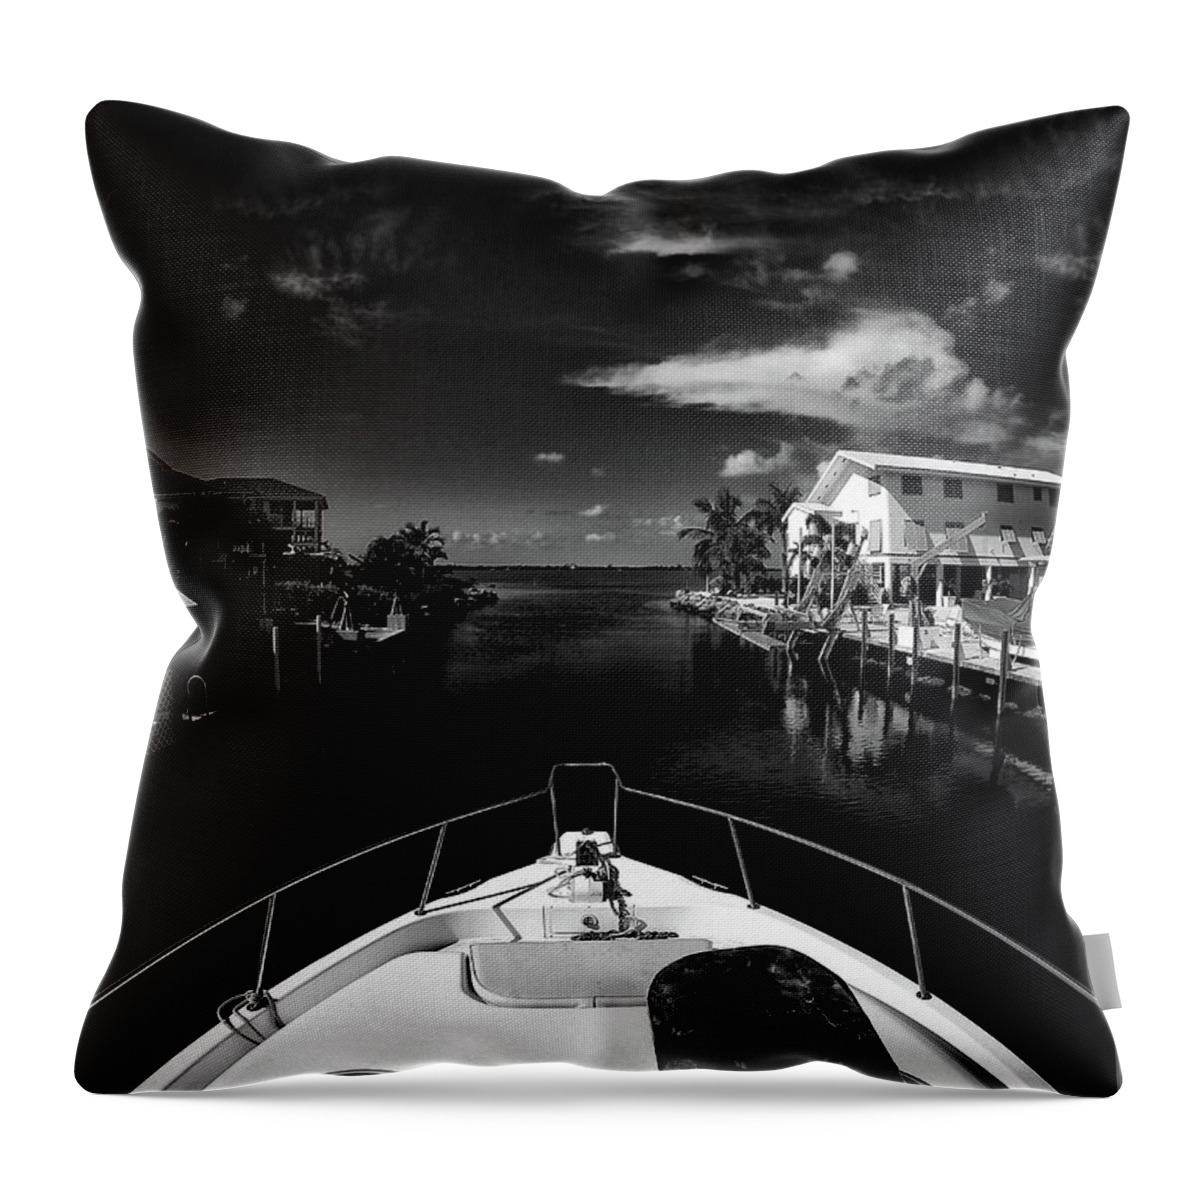 Black & White Throw Pillow featuring the photograph Boat Ride by Kevin Cable